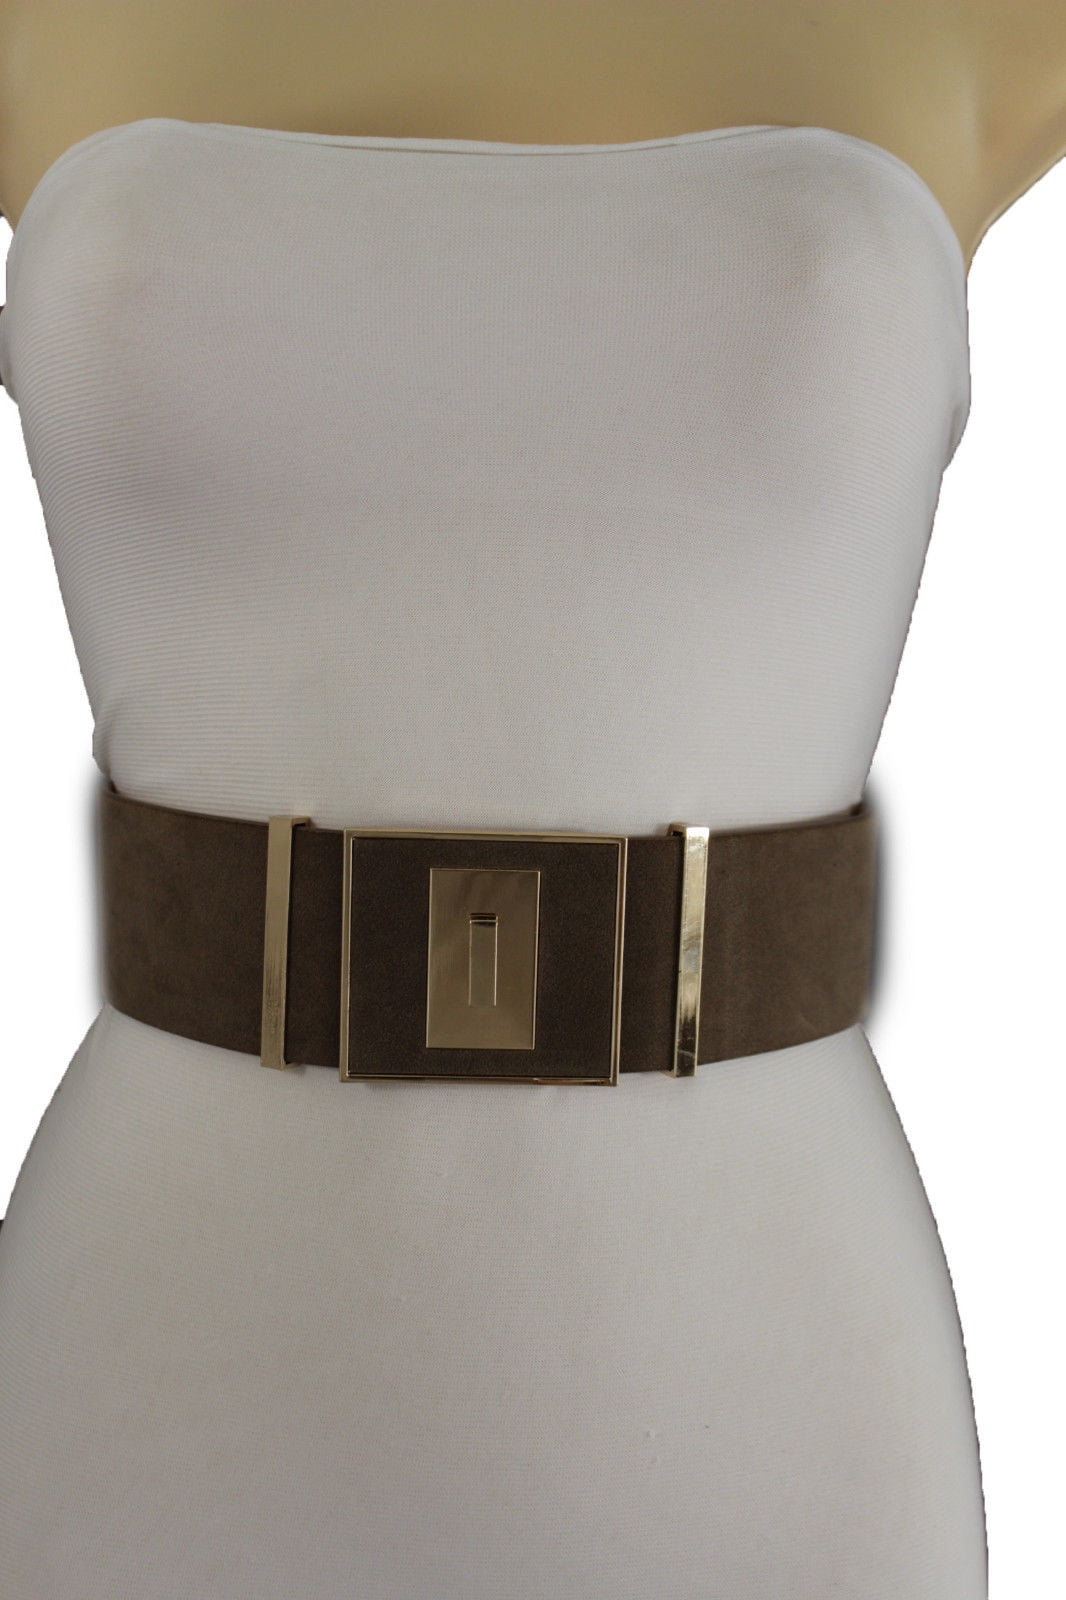 New Women Wide Fashion Belt Blue Faux Suede Leather Gold Metal Square Buckle S M 